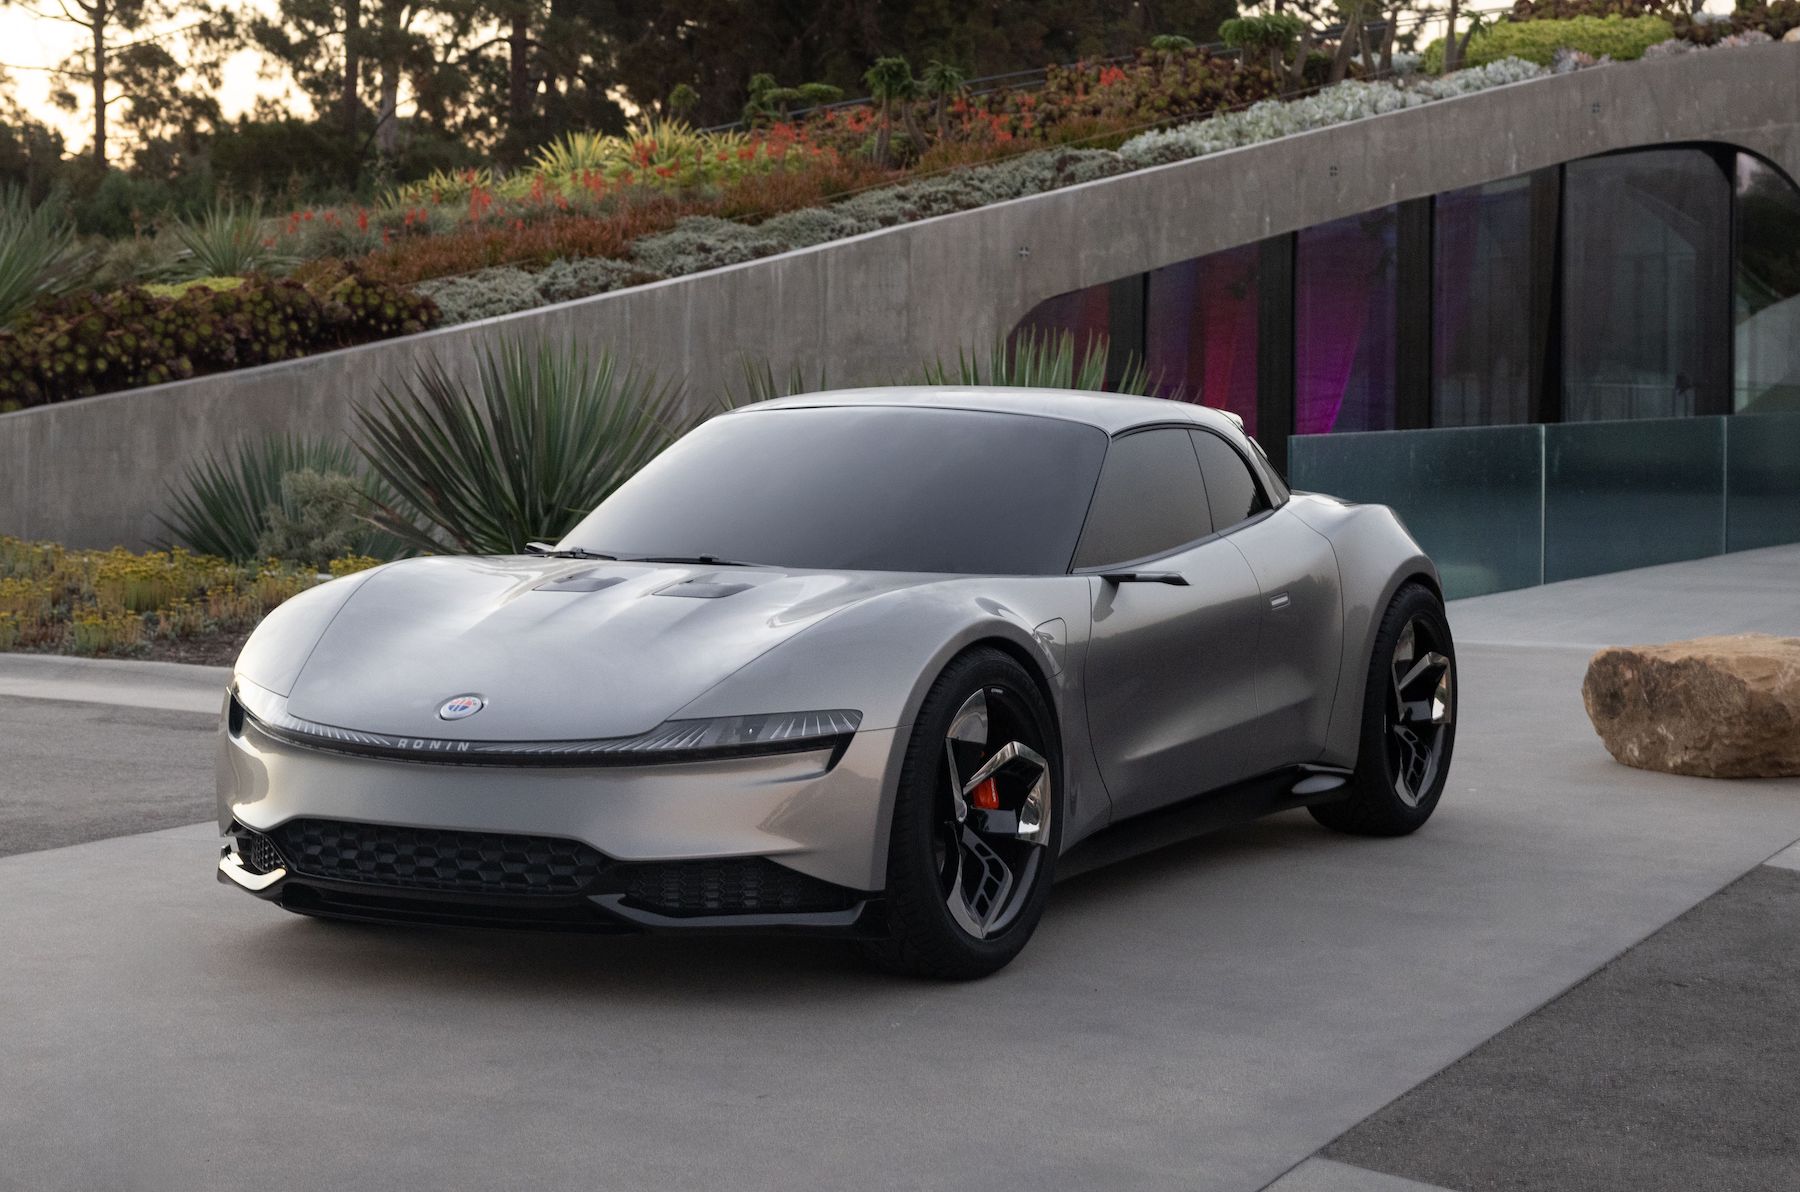 Fisker Ronin Revealed ahead of 2025, Company Aiming for Power Outputs of 735kW